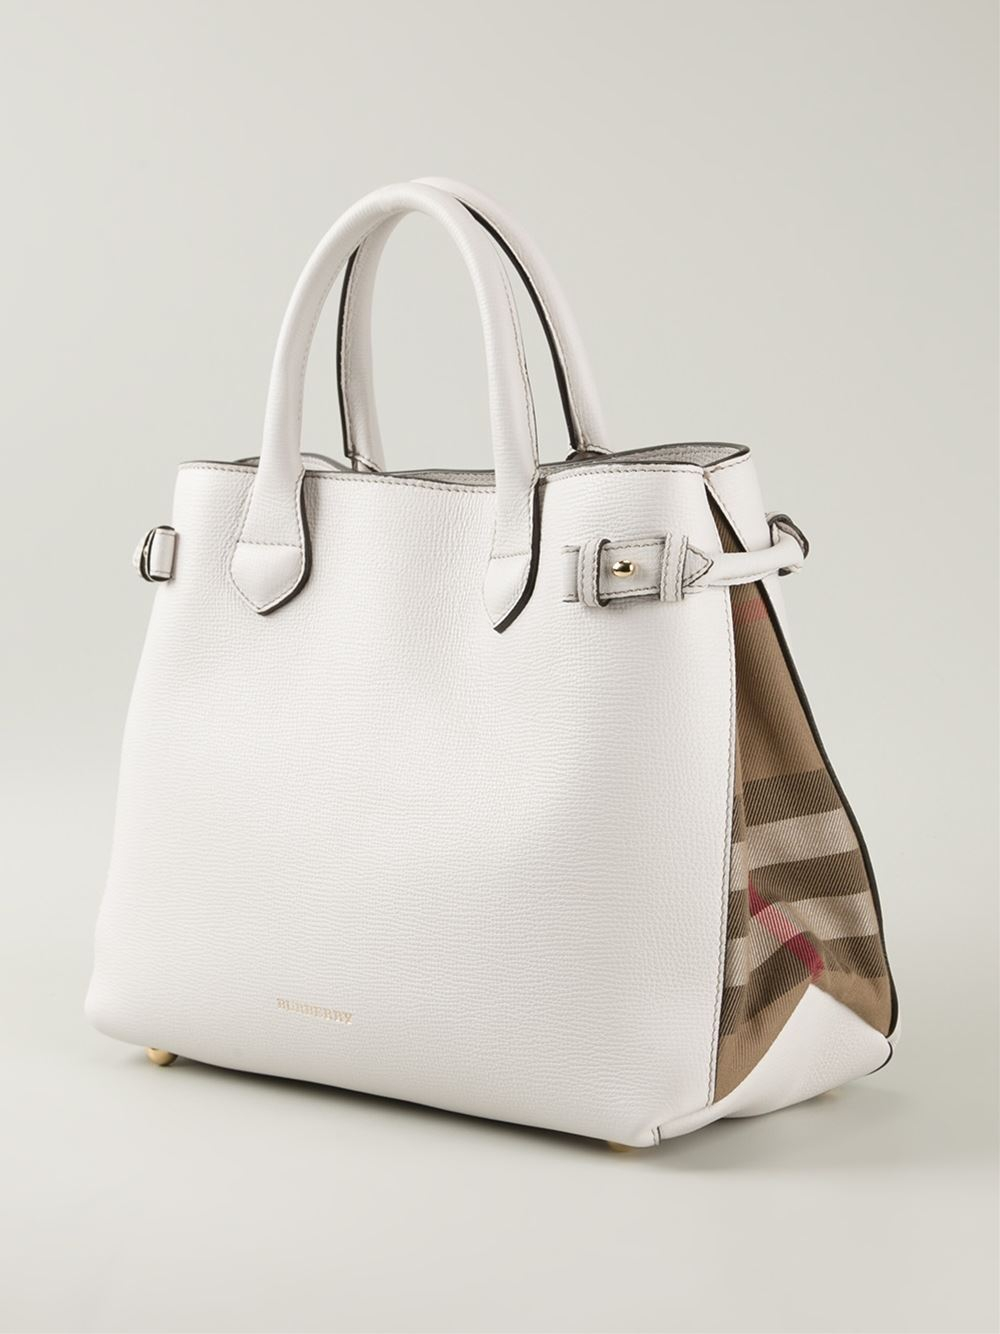 Lyst - Burberry Medium 'banner' Tote in White